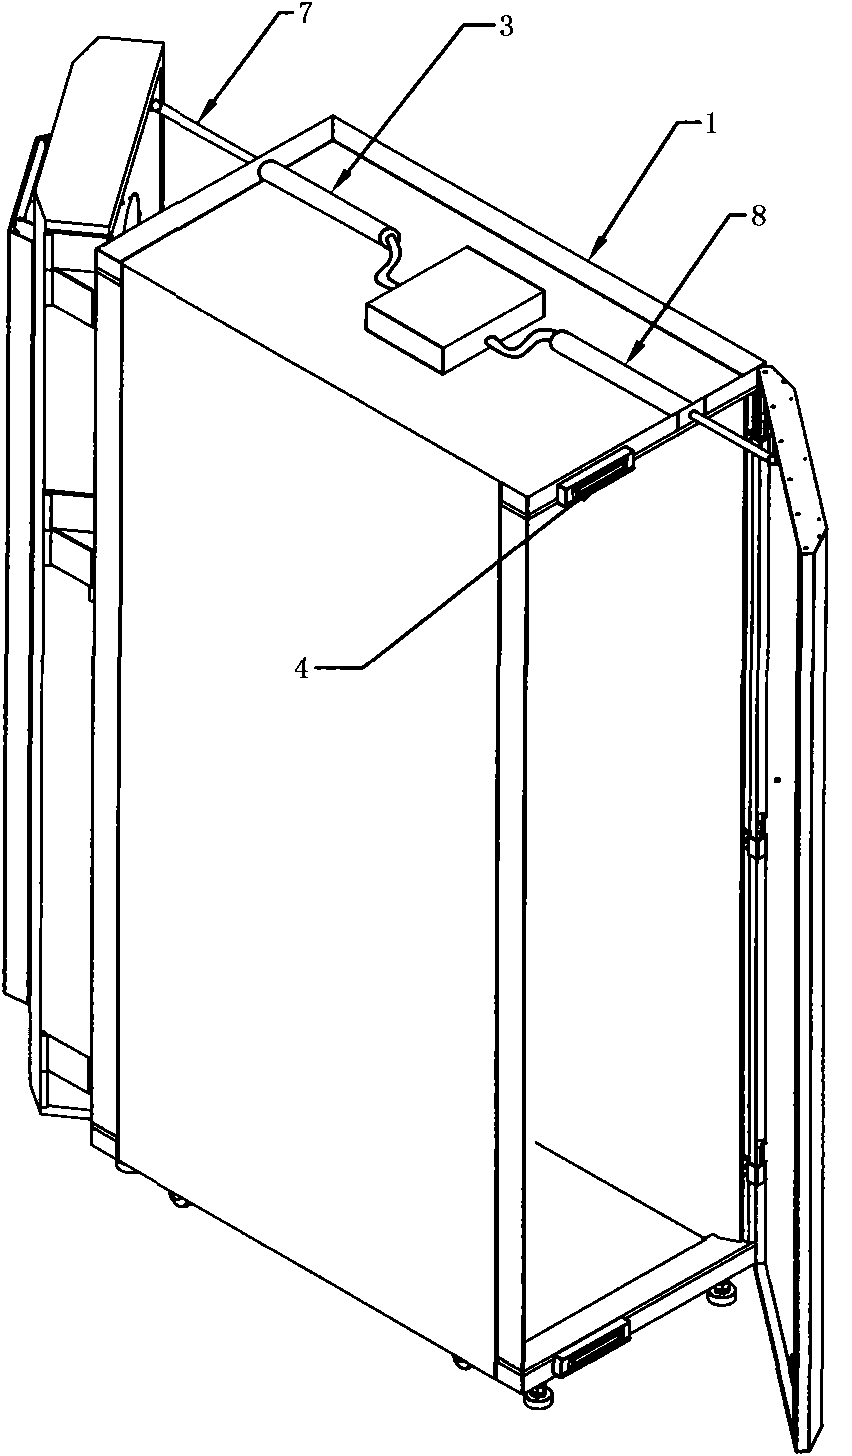 Electronic entrance guard device used for equipment cabinet